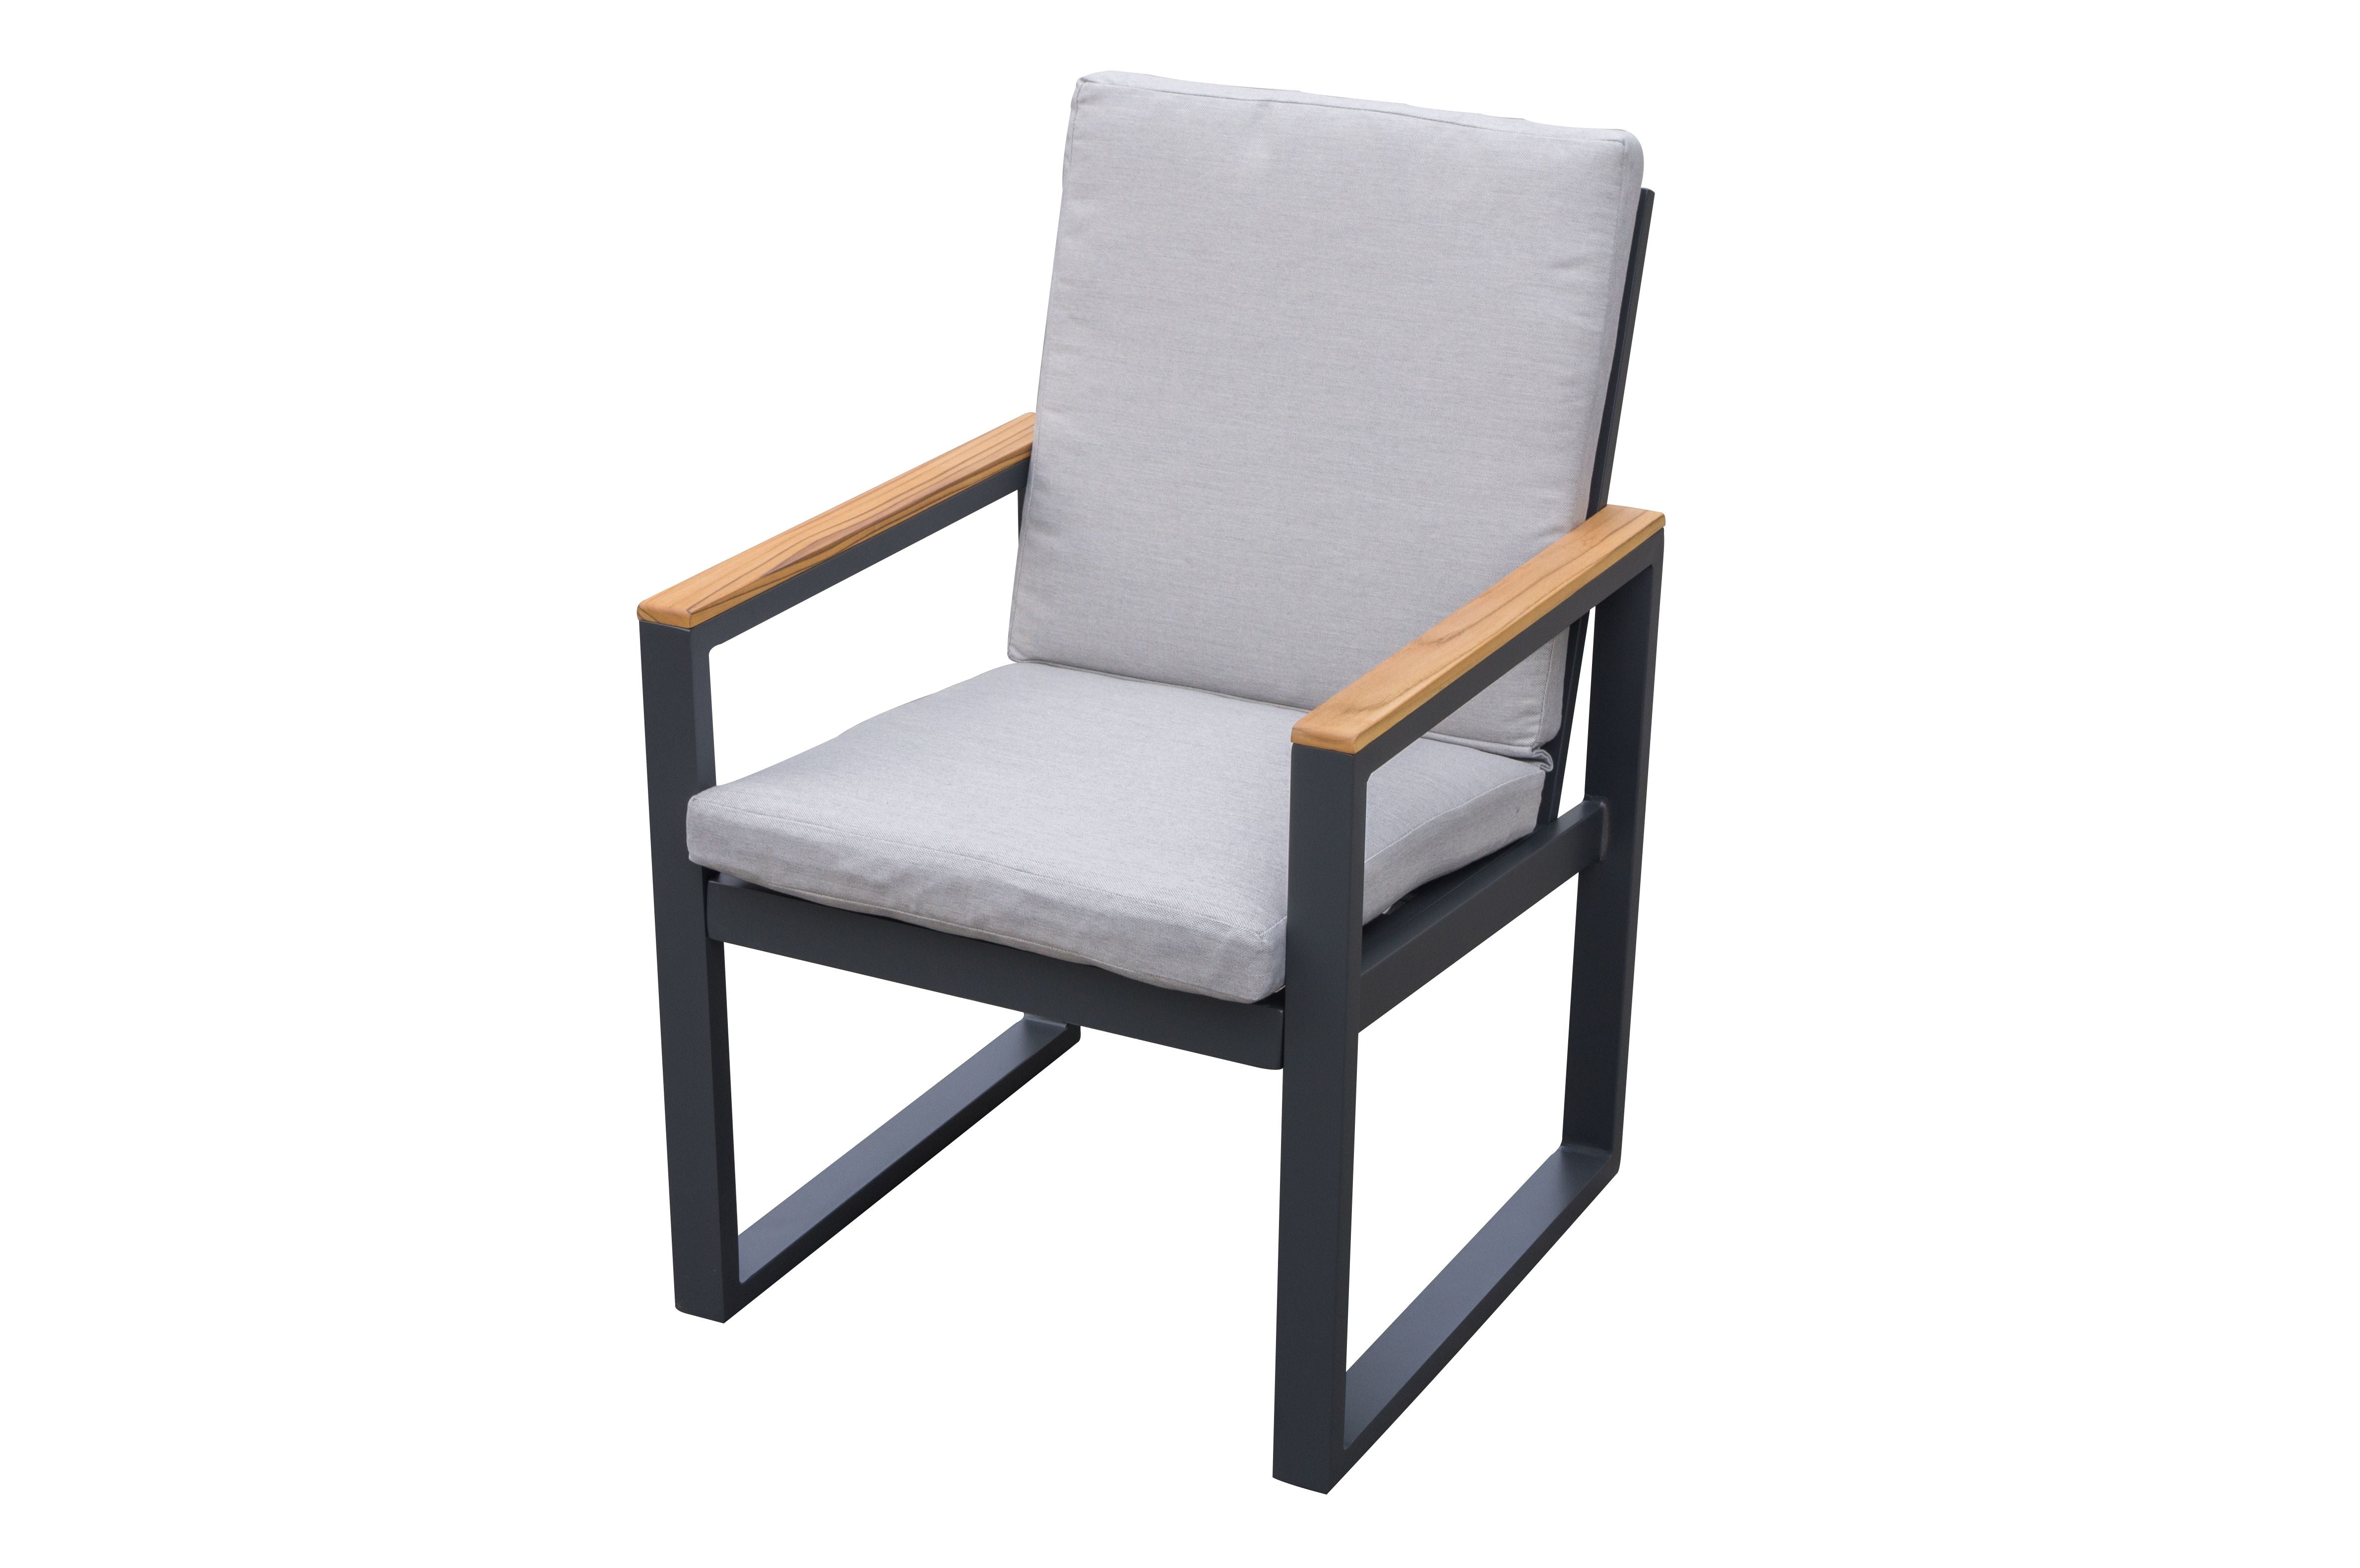 MOSS MOSS-6006C - Maroma Collection, Charcoal aluminum chair with square shape armrest with teck wood inserts. Beige back & Seat cushion sewt together 49.2" x 13.3" x H 16.5"